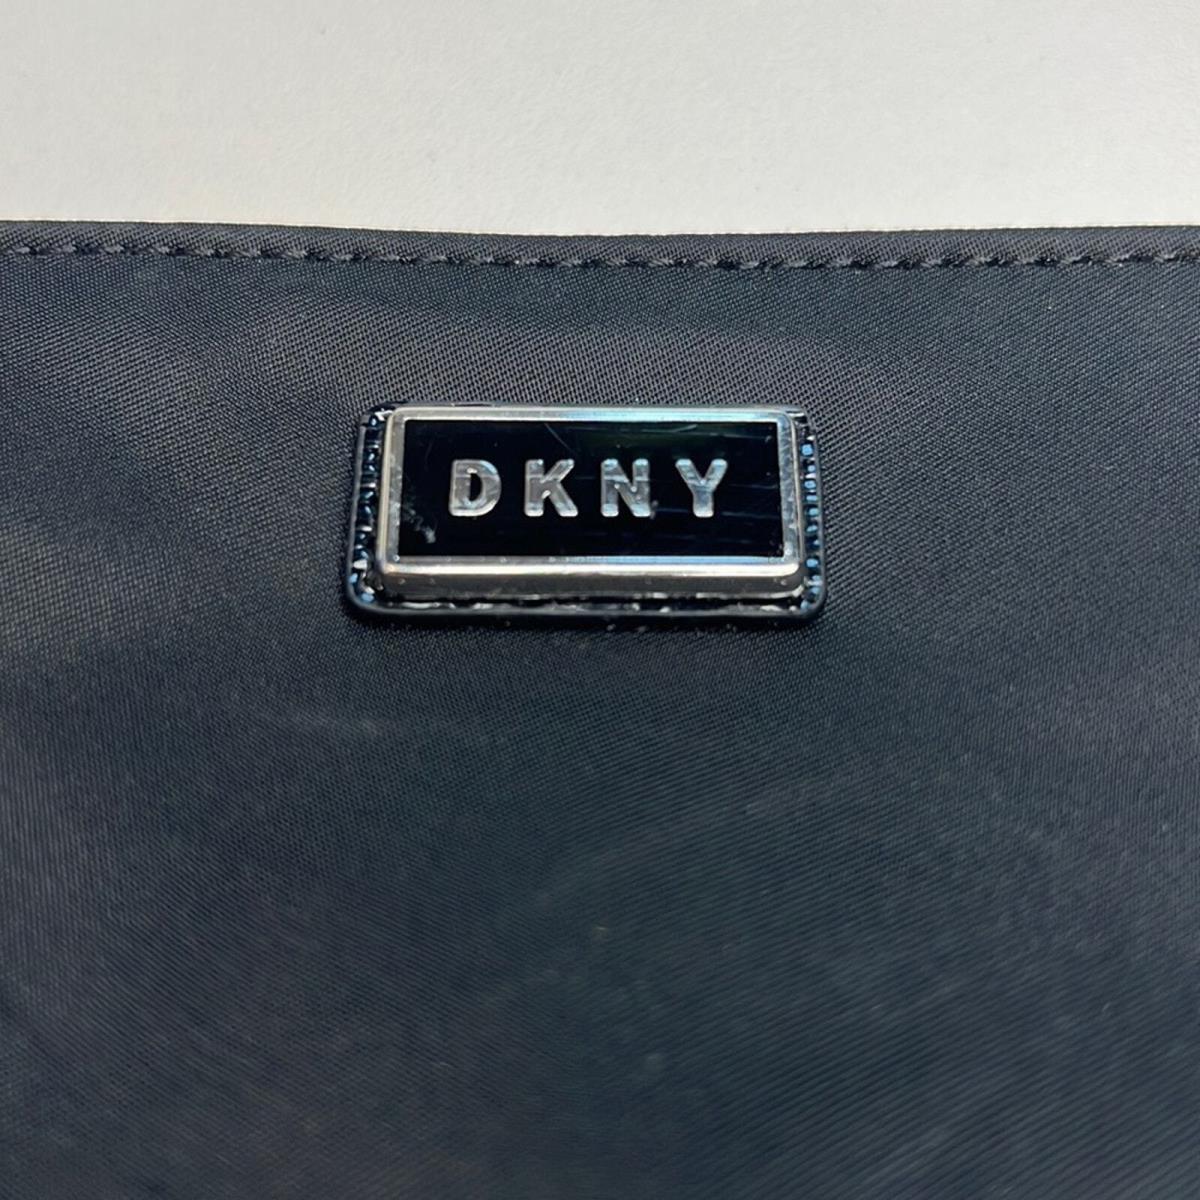 Dkny Solid Black Nylon Clutch Pouch Silver Hardware Zip Closure